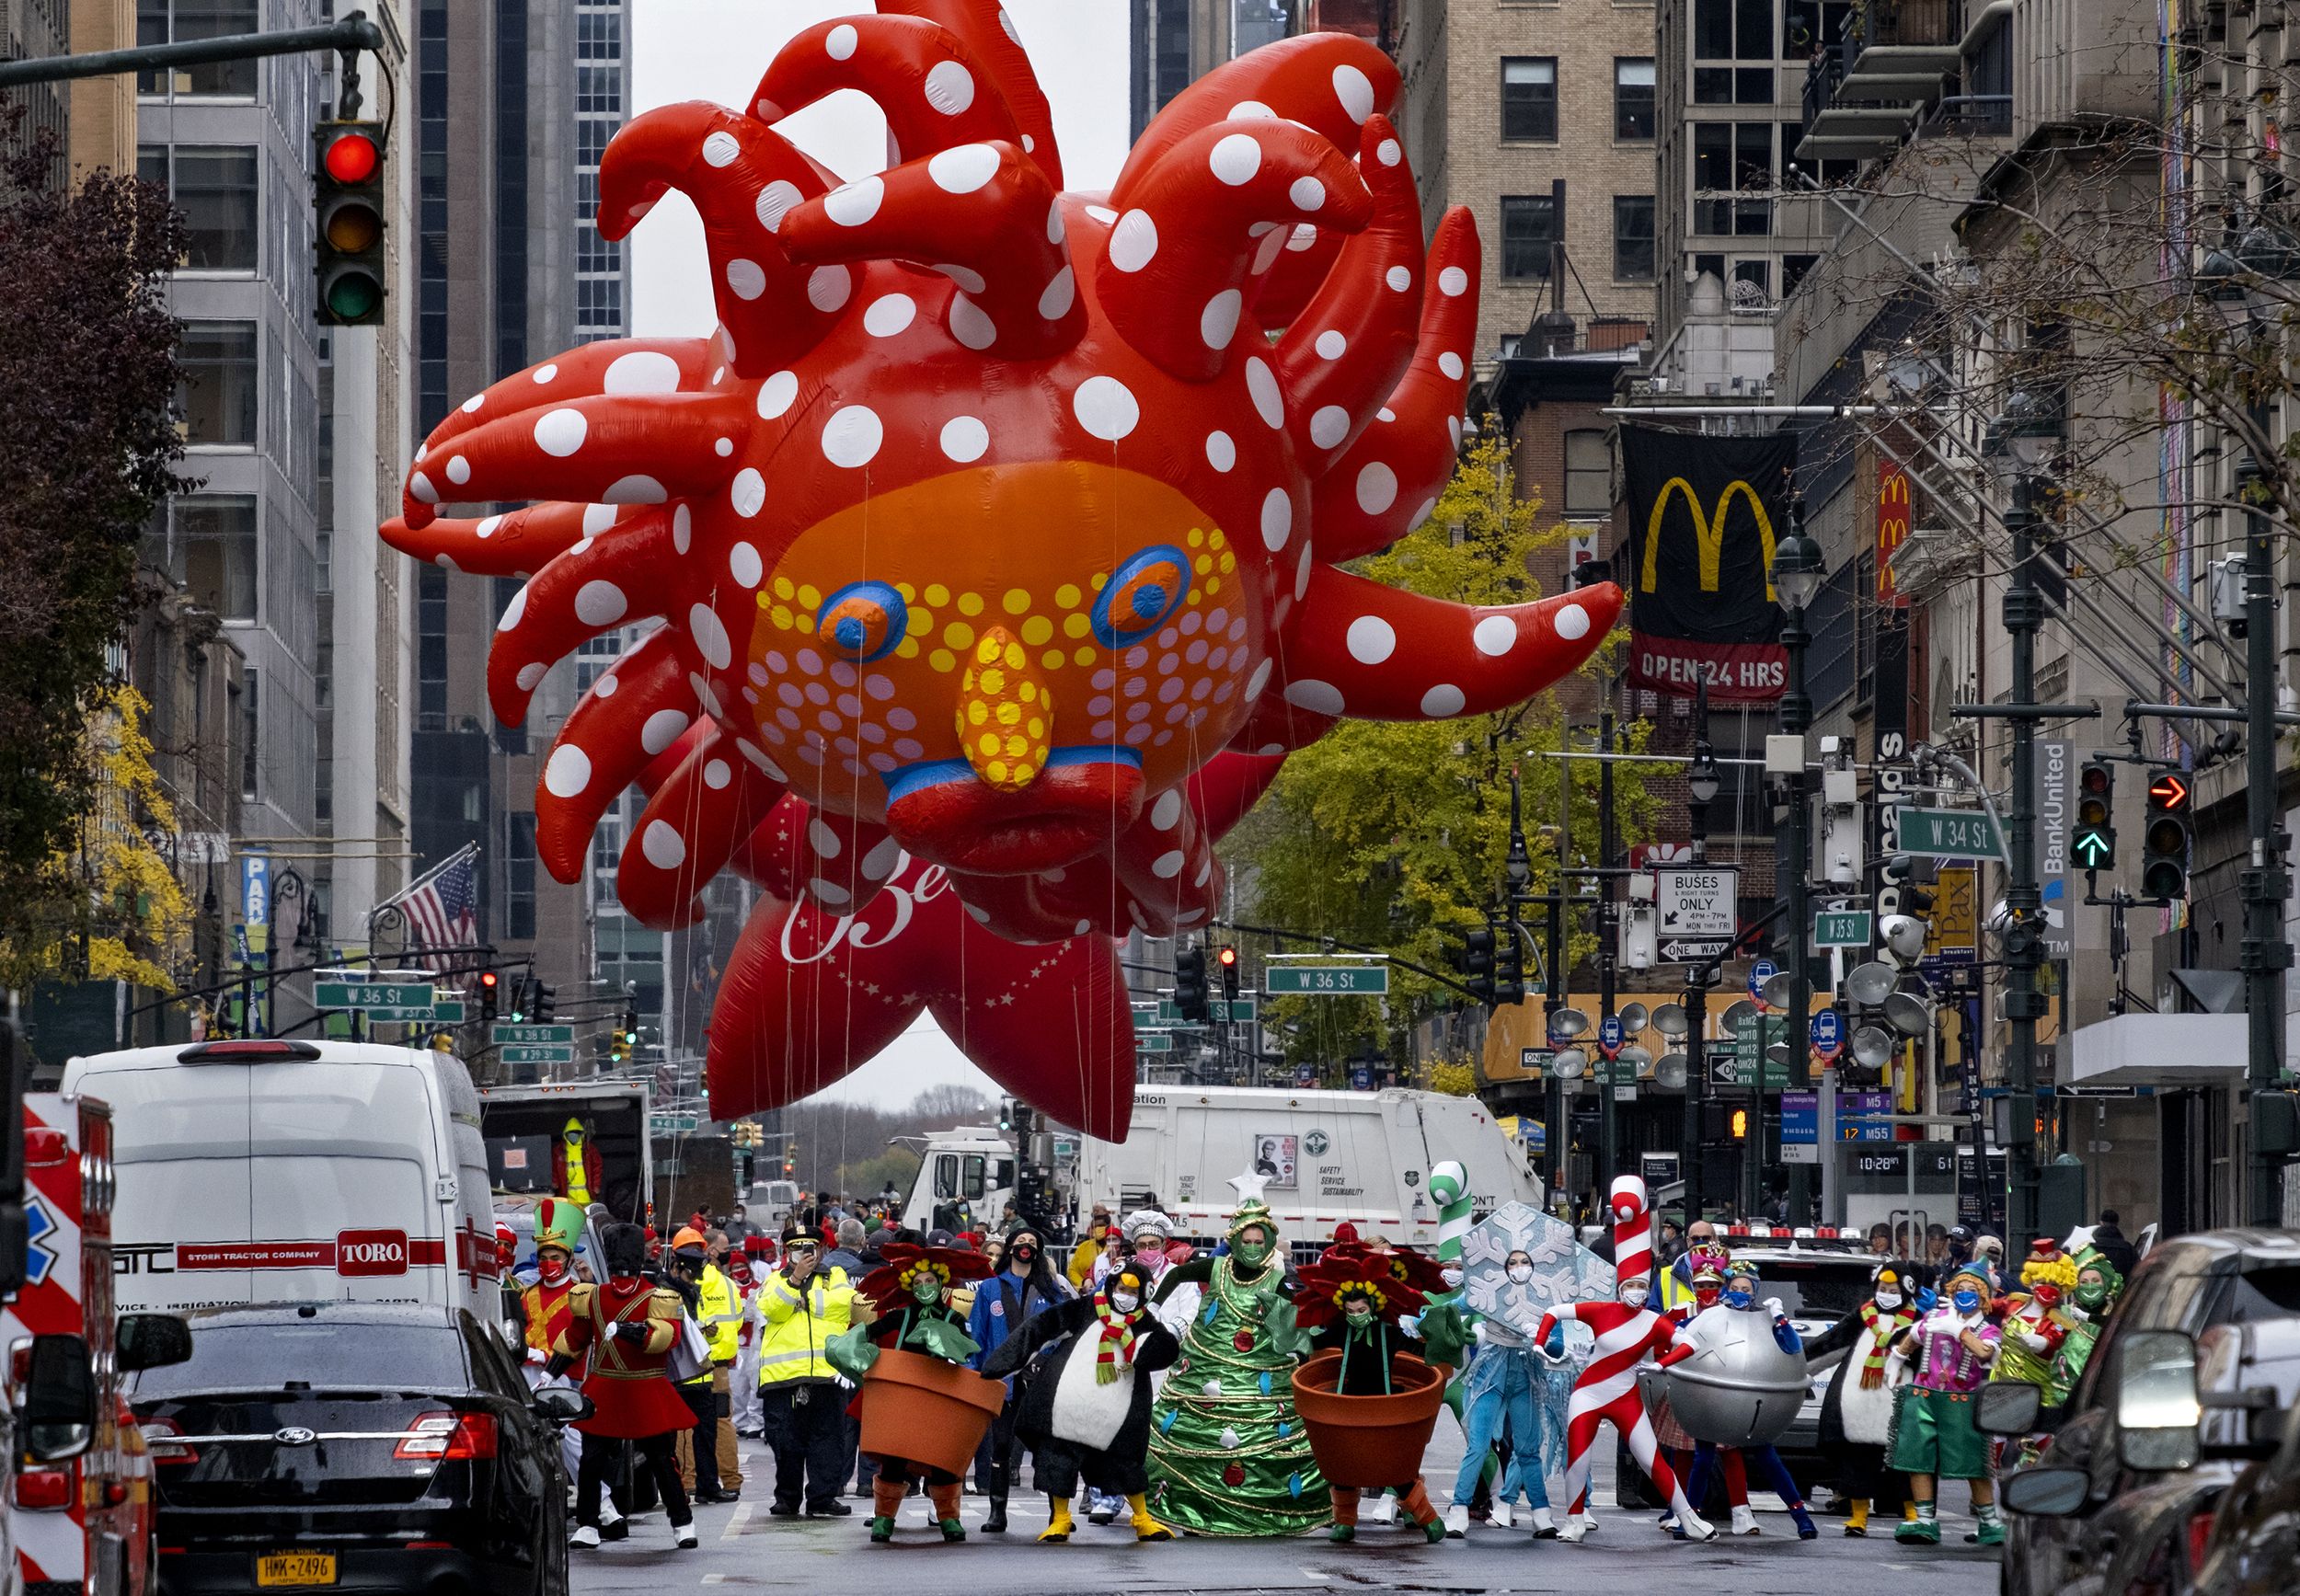 Macy's Thanksgiving Day Parade in New York Nov. 26, 2020 The